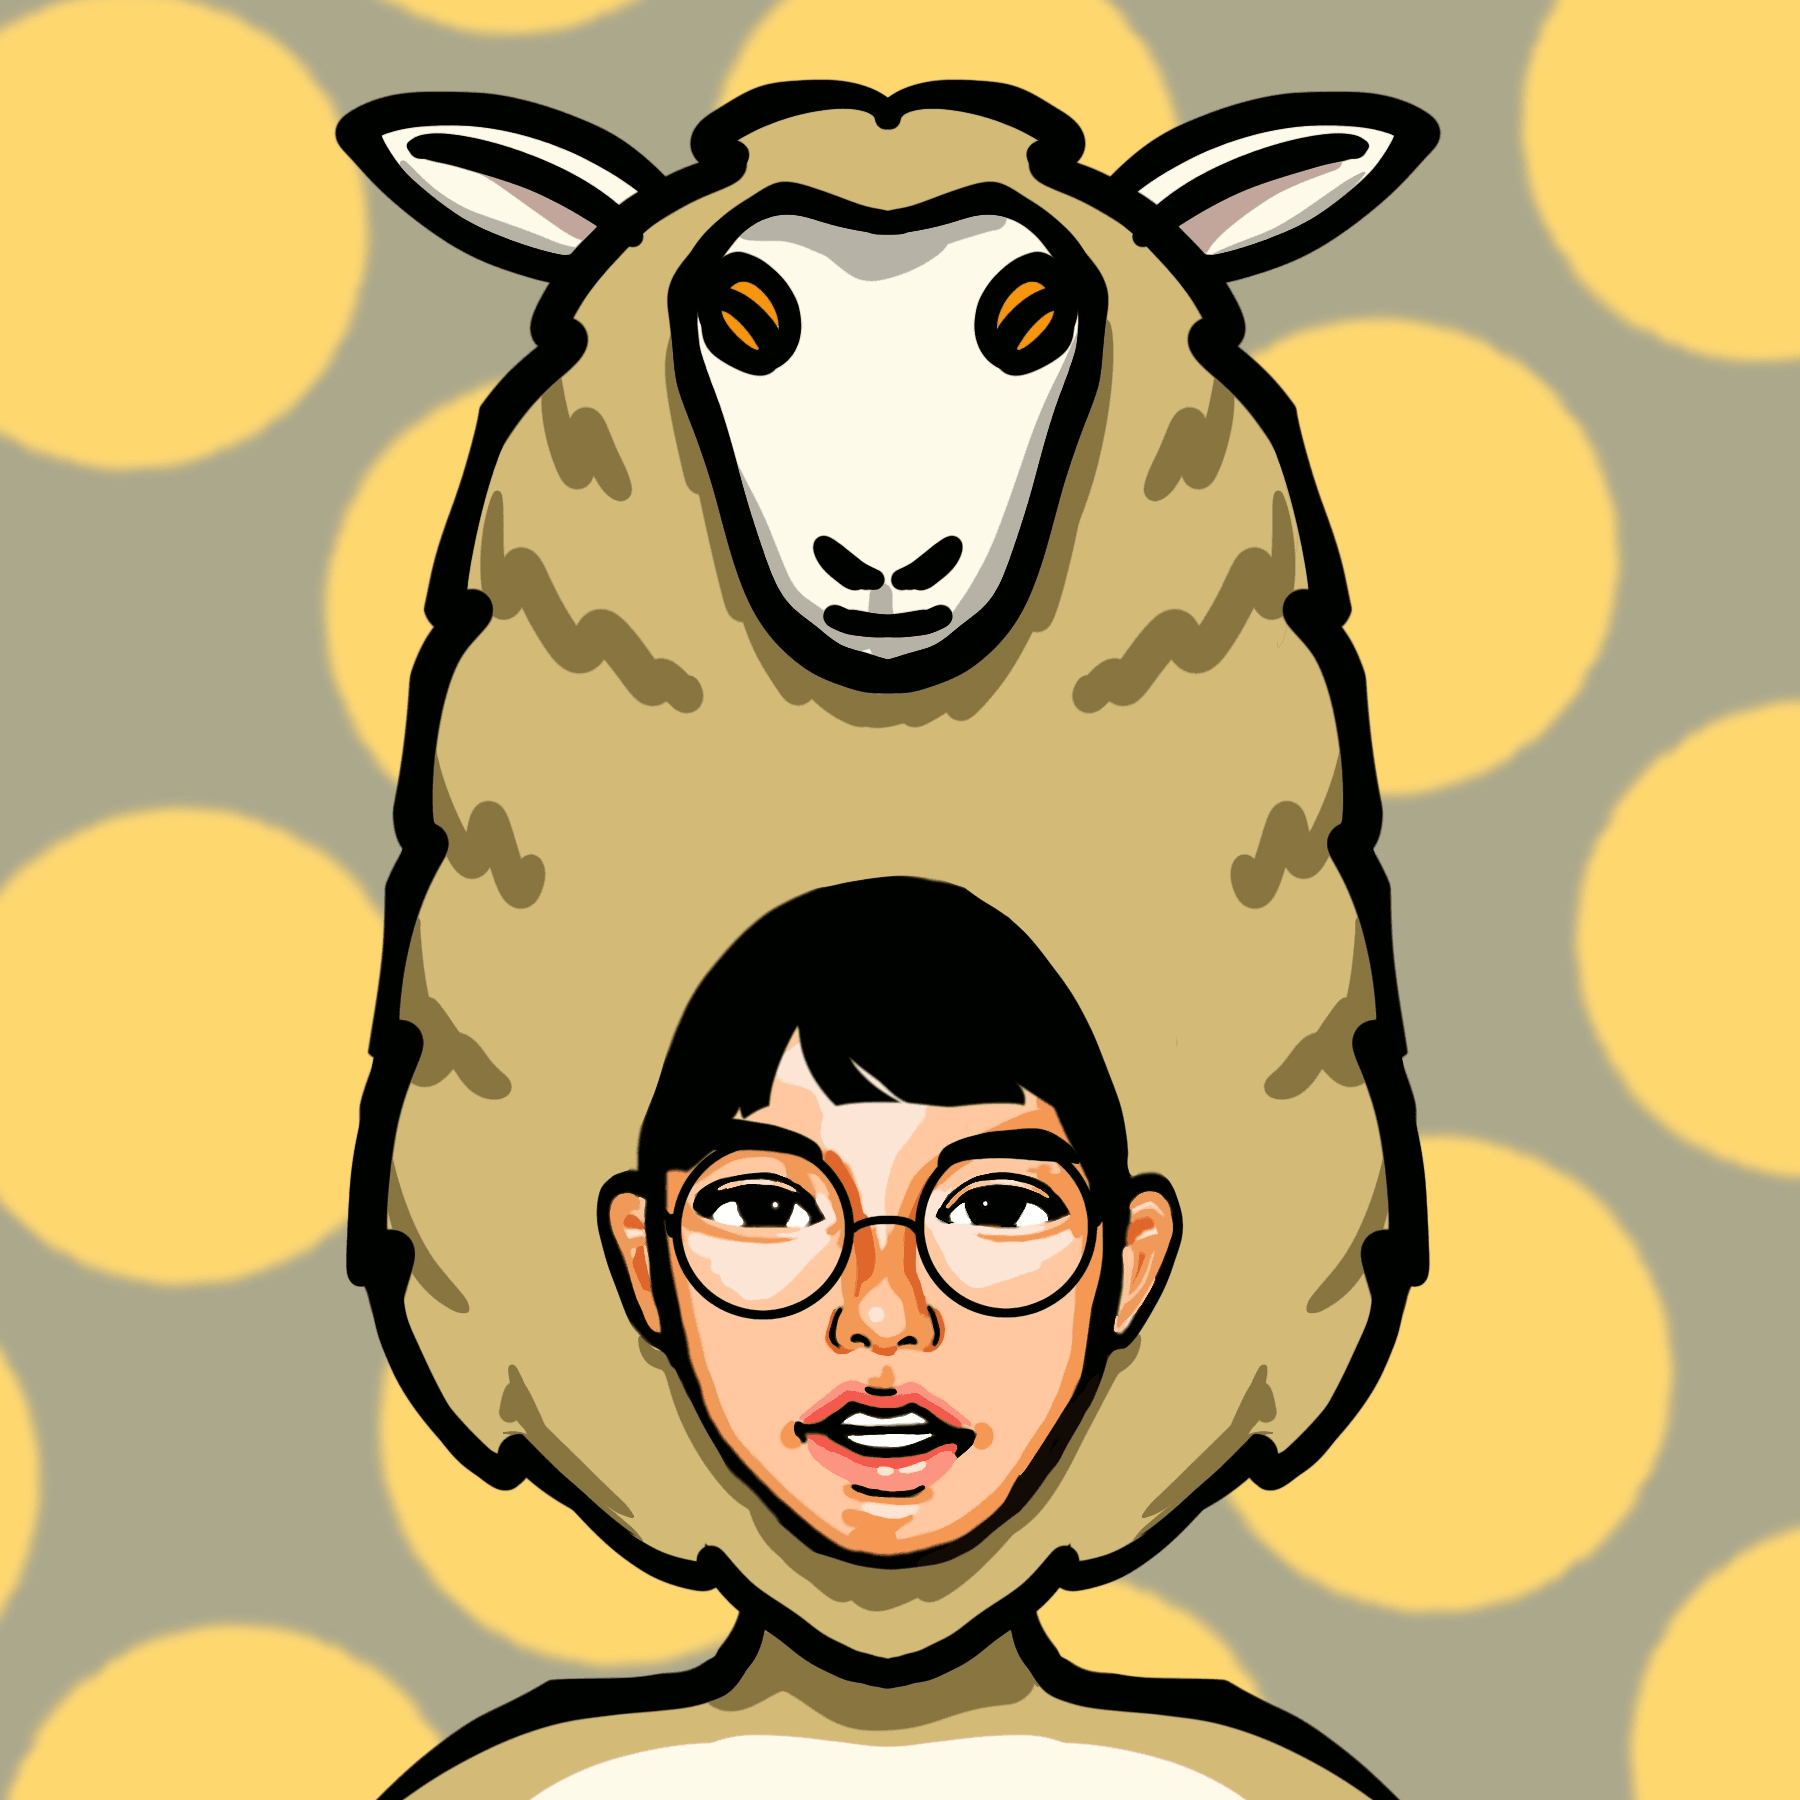 sheep and a girl(costume)